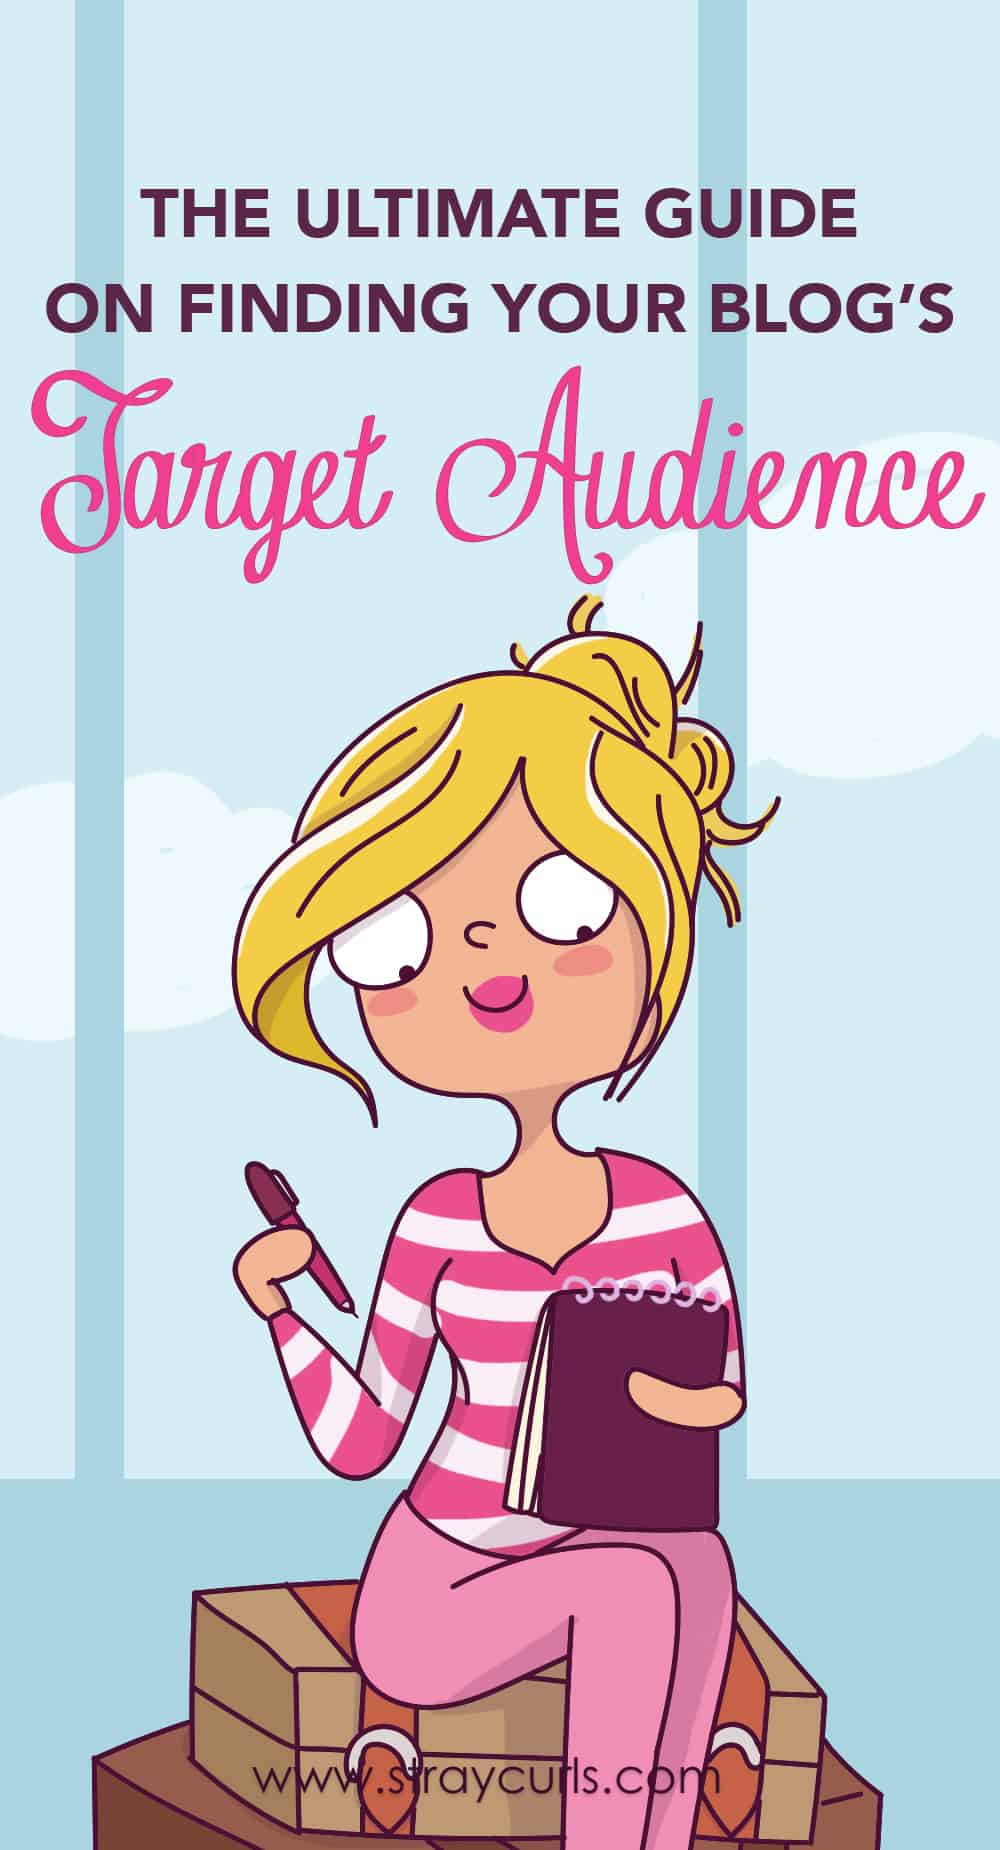 Without marketing to the right target audience, your blog posts or products will not take off. By narrowing down your niche and identifying your ideal blog reader, you will discover your target market! #blog #blogging #bloggingtips #millennial #girlboss Girl finding target audience illustration, target audience illustration.